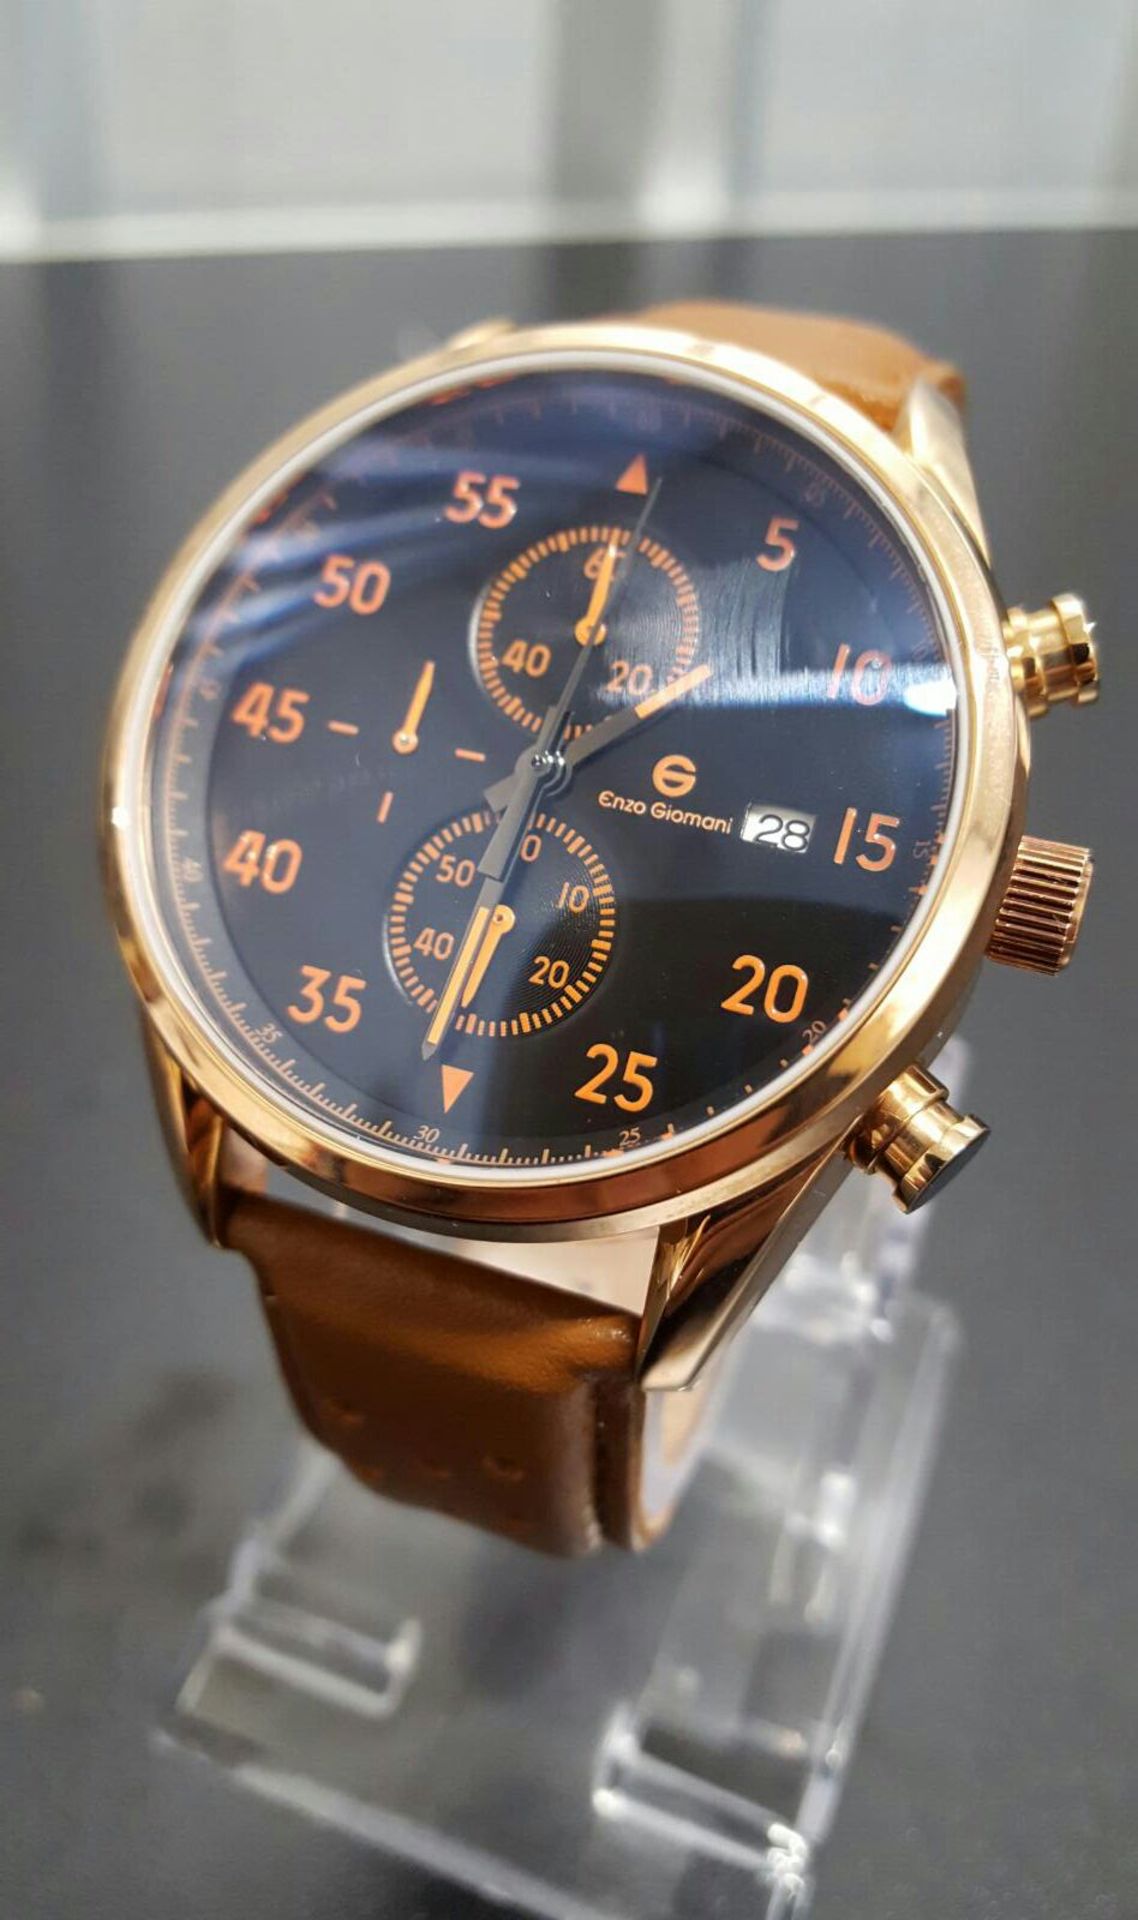 BRAND NEW ENZO GIOMANI EG0027, GENTS ROSE GOLD WITH BLACK FACE, TAN LEATHER STRAP CHRONOGRAPH WATCH,